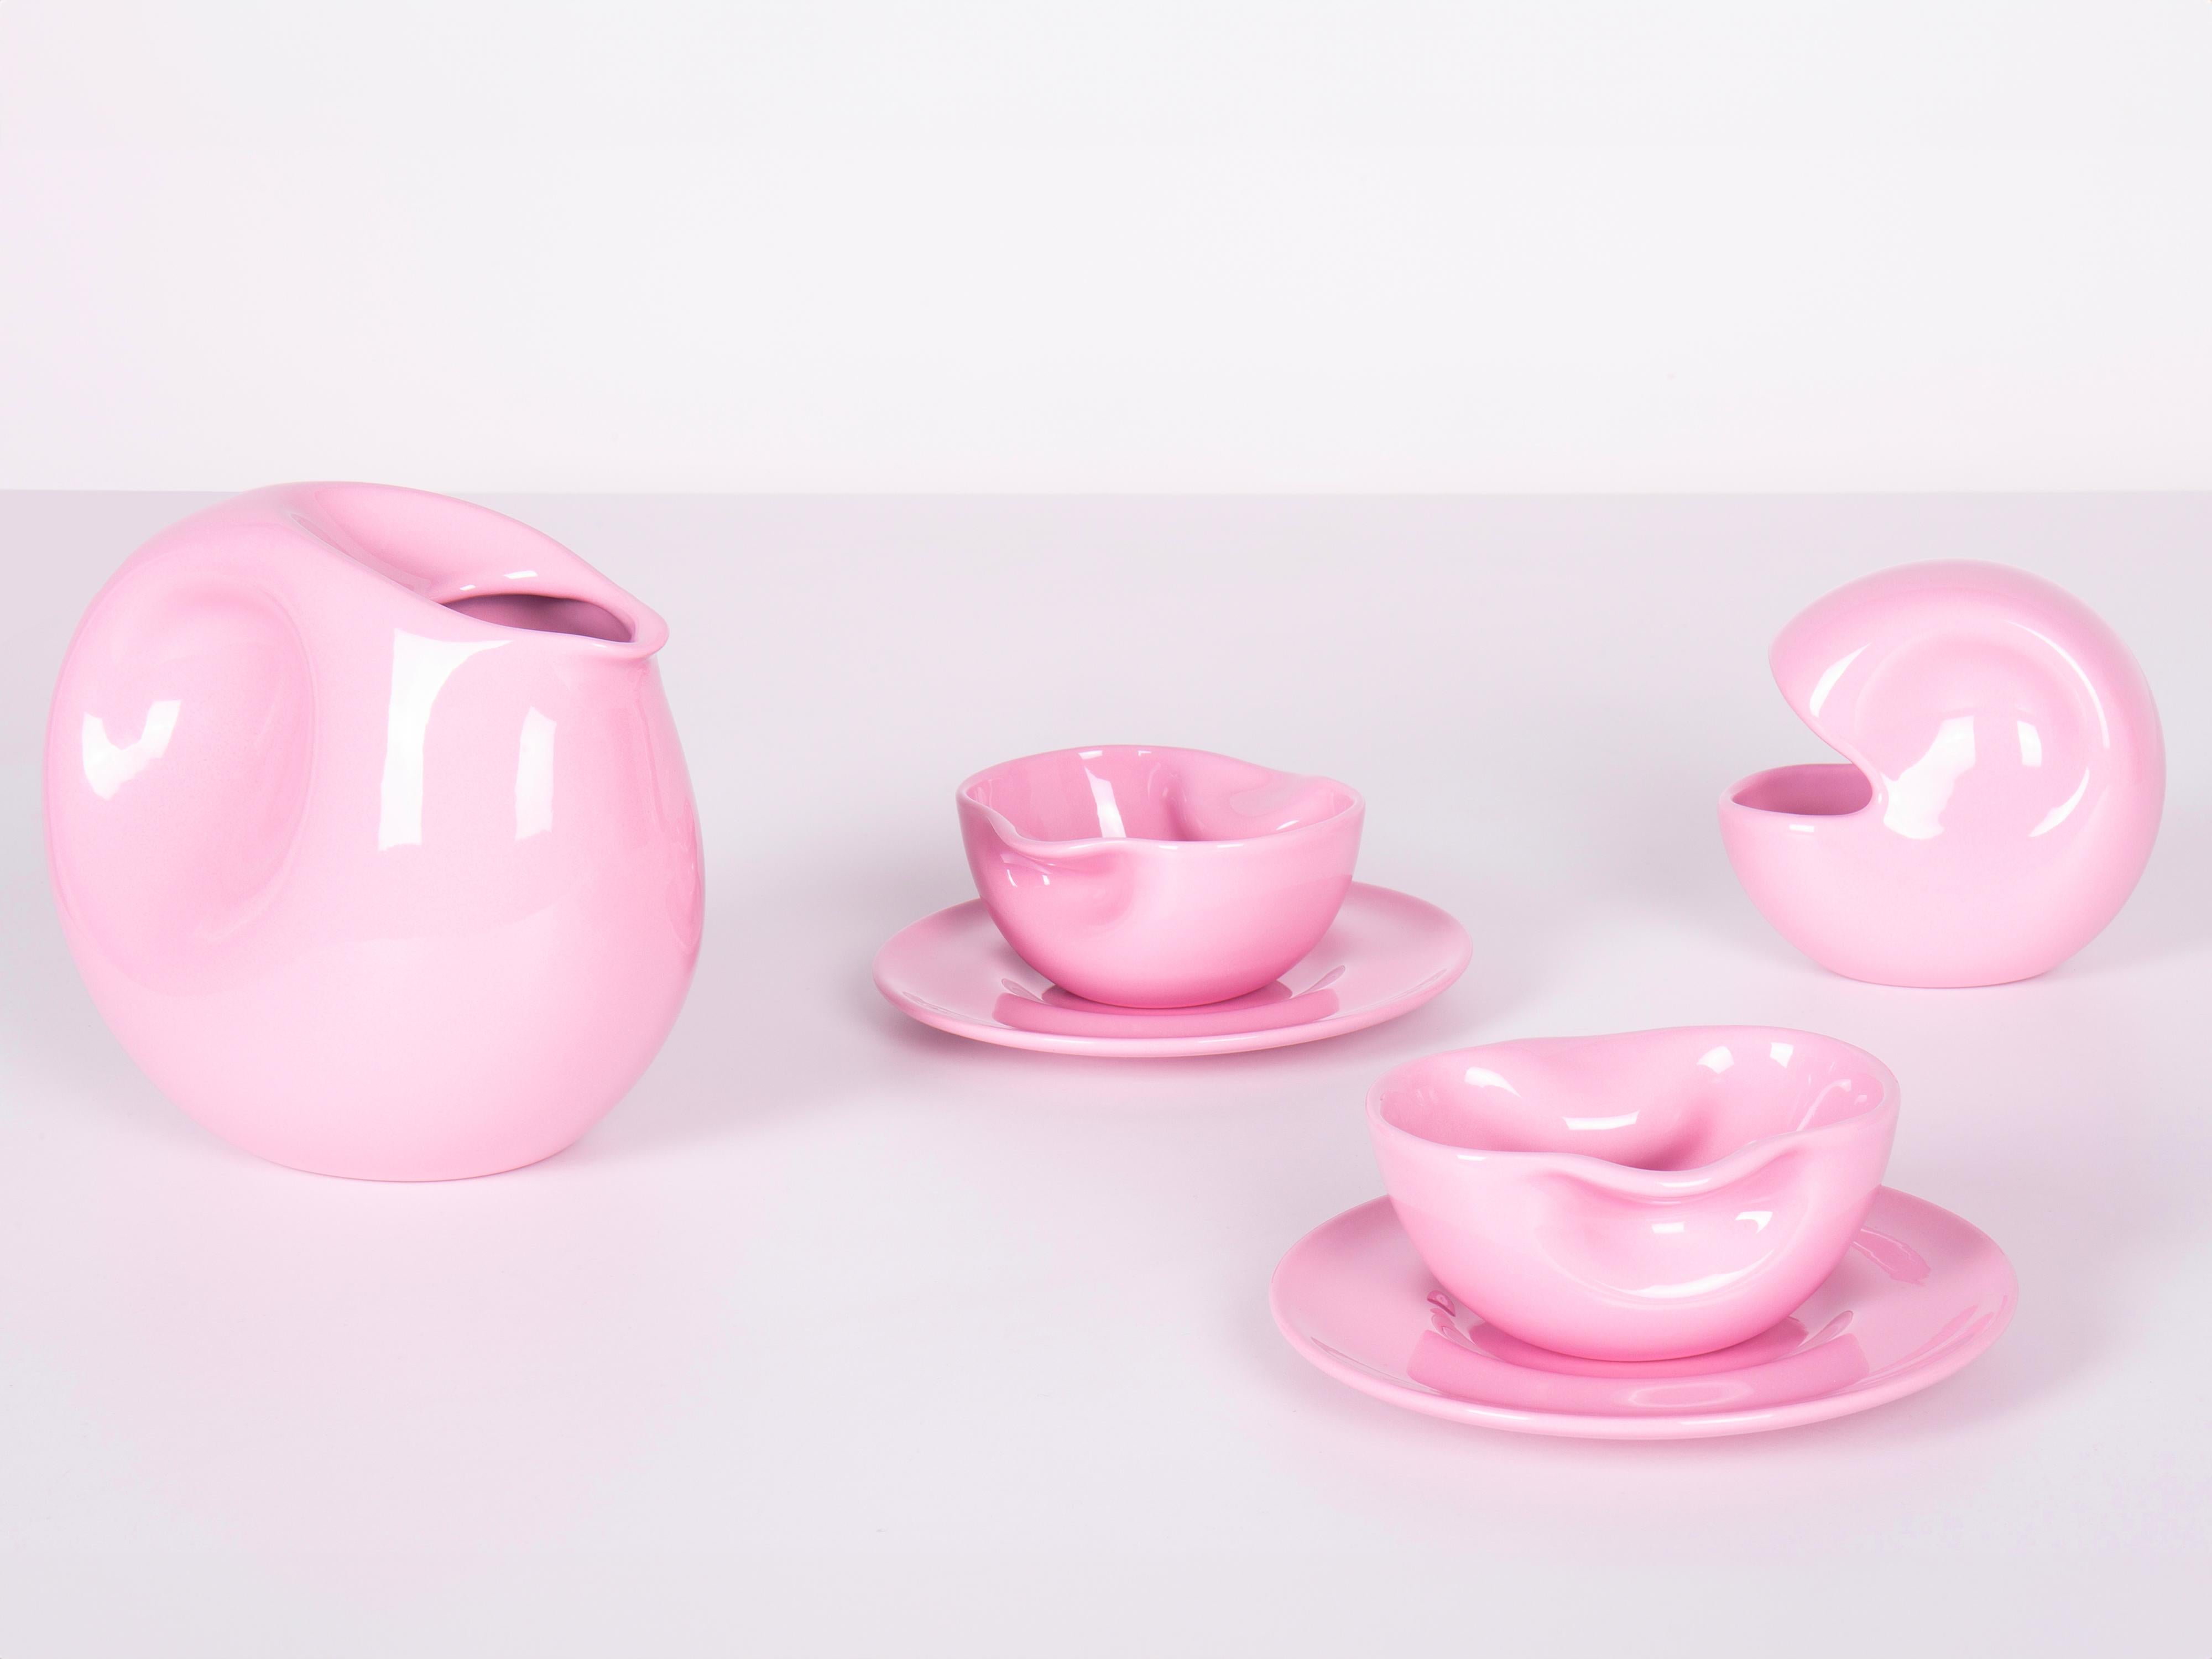 Designed in 1975 - Paradisoterrestre Edition 2023

Material: enameled pottery

Colours: pink; also available in mint green or white.

The tea set designed by Italian artist Augusto Betti in 1975 consists of 1 teapot, 1 sugar bowl, 2 cups and 2